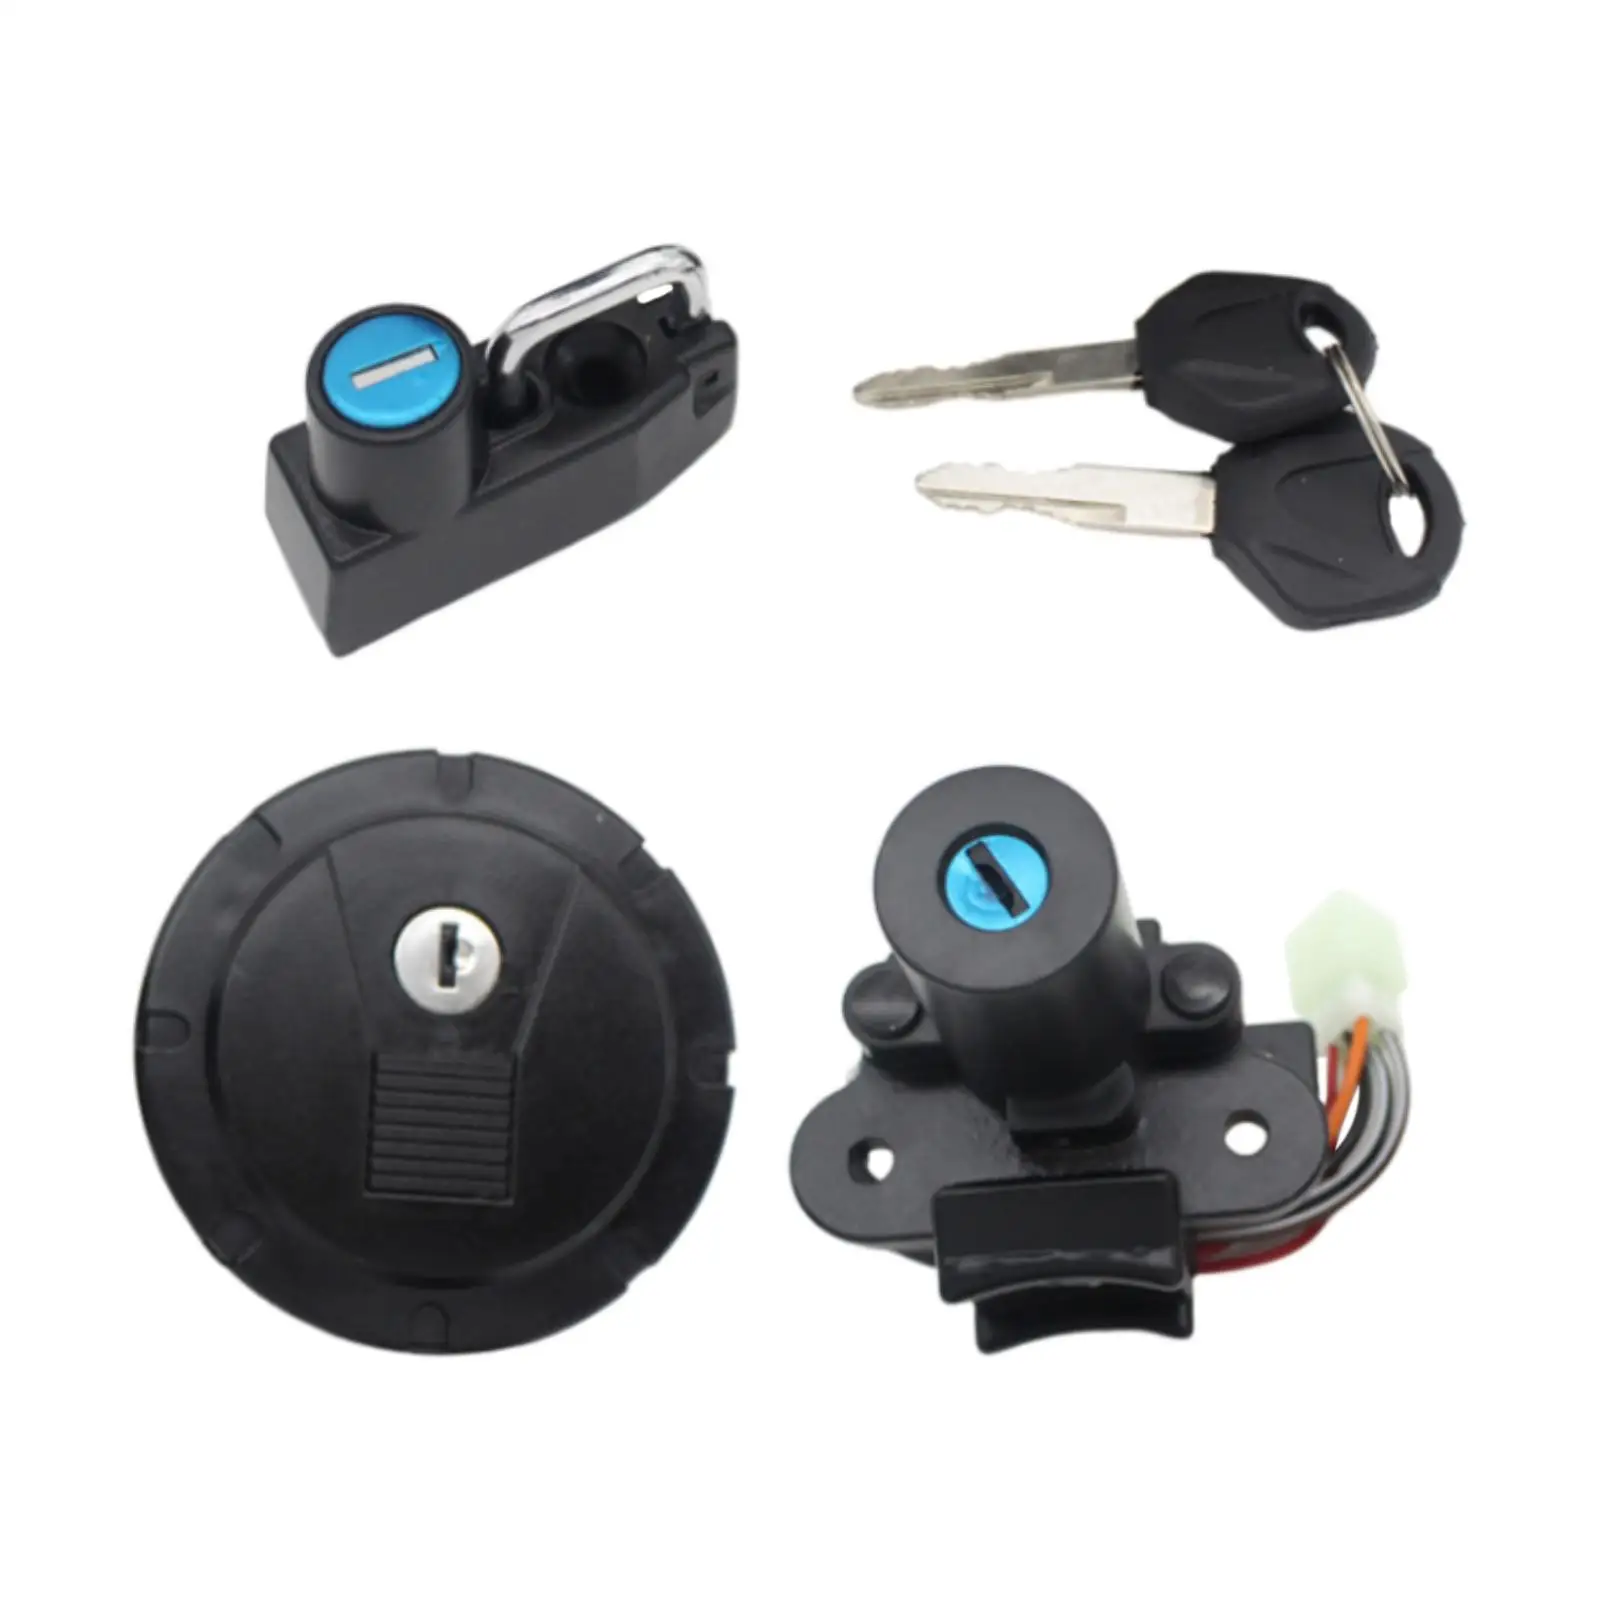 Fuel Gas Tank Cap Lock Cover with Keys Replacement Parts for Klx Kl 250 Kmx125 Kmx250 Good Performance Accessory Easily Install